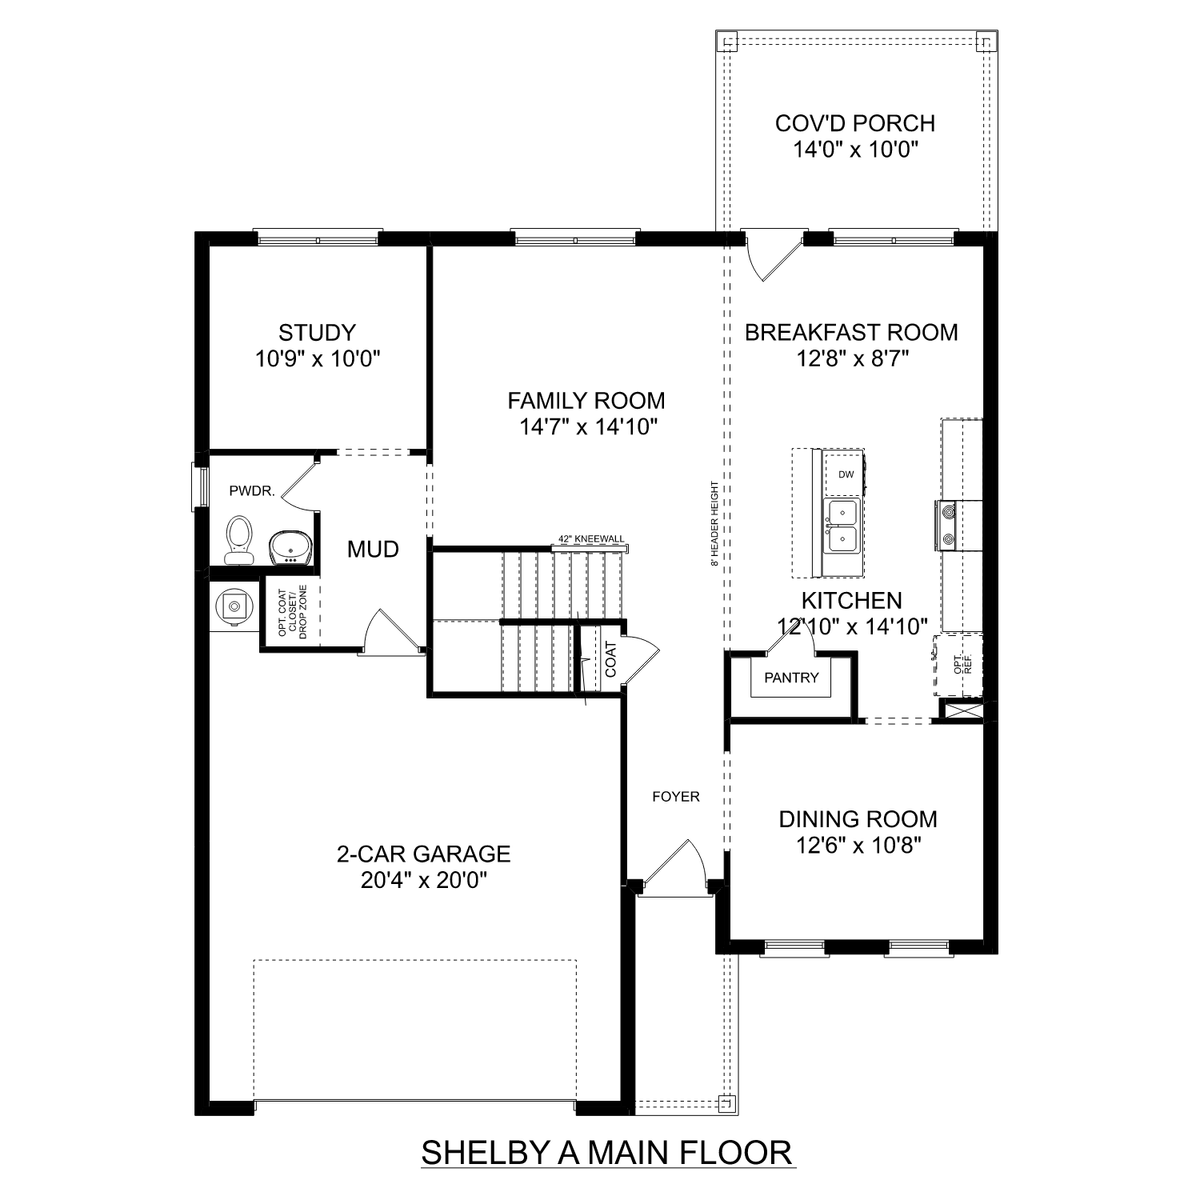 1 - The Shelby A buildable floor plan layout in Davidson Homes' Walker's Hill community.